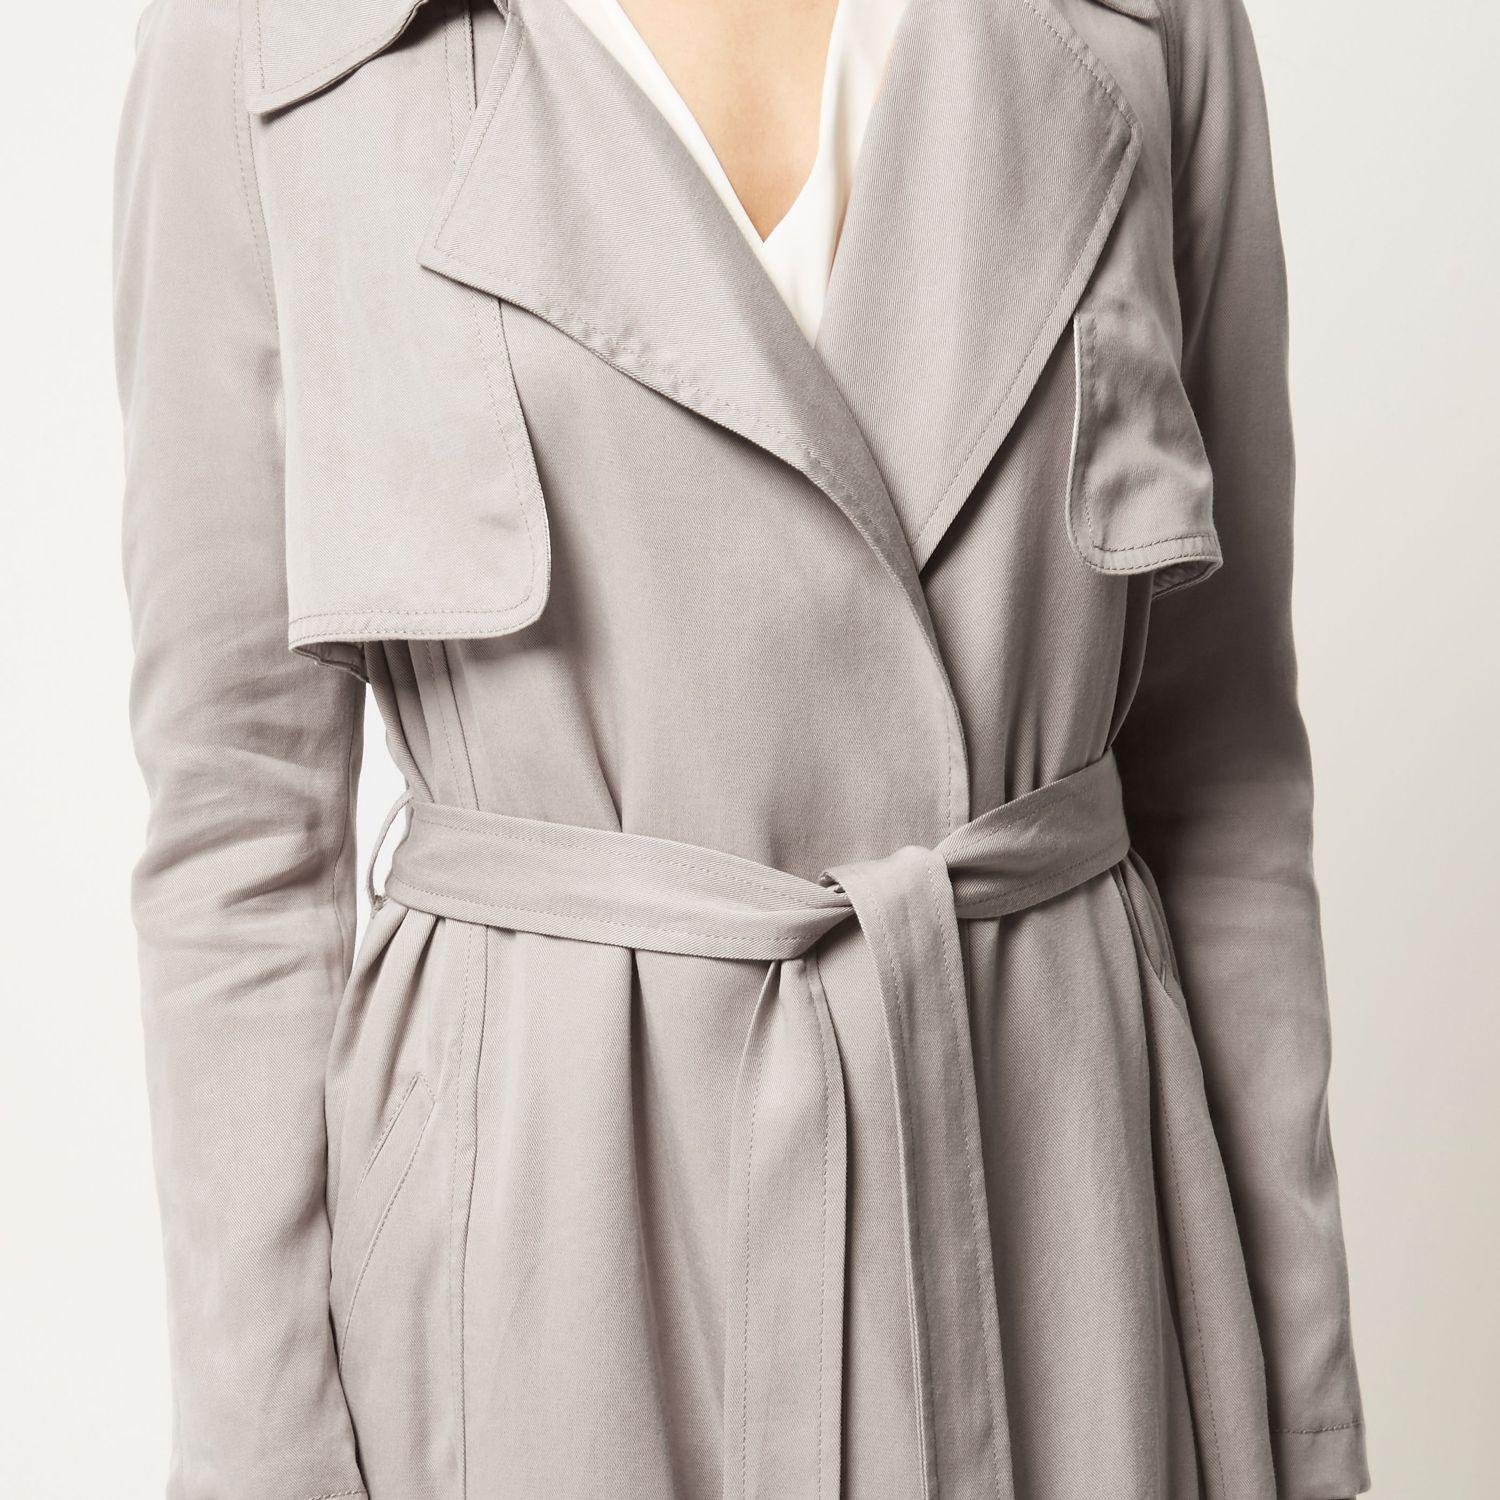 River Island Lightweight Trench Coat in Pink - Lyst